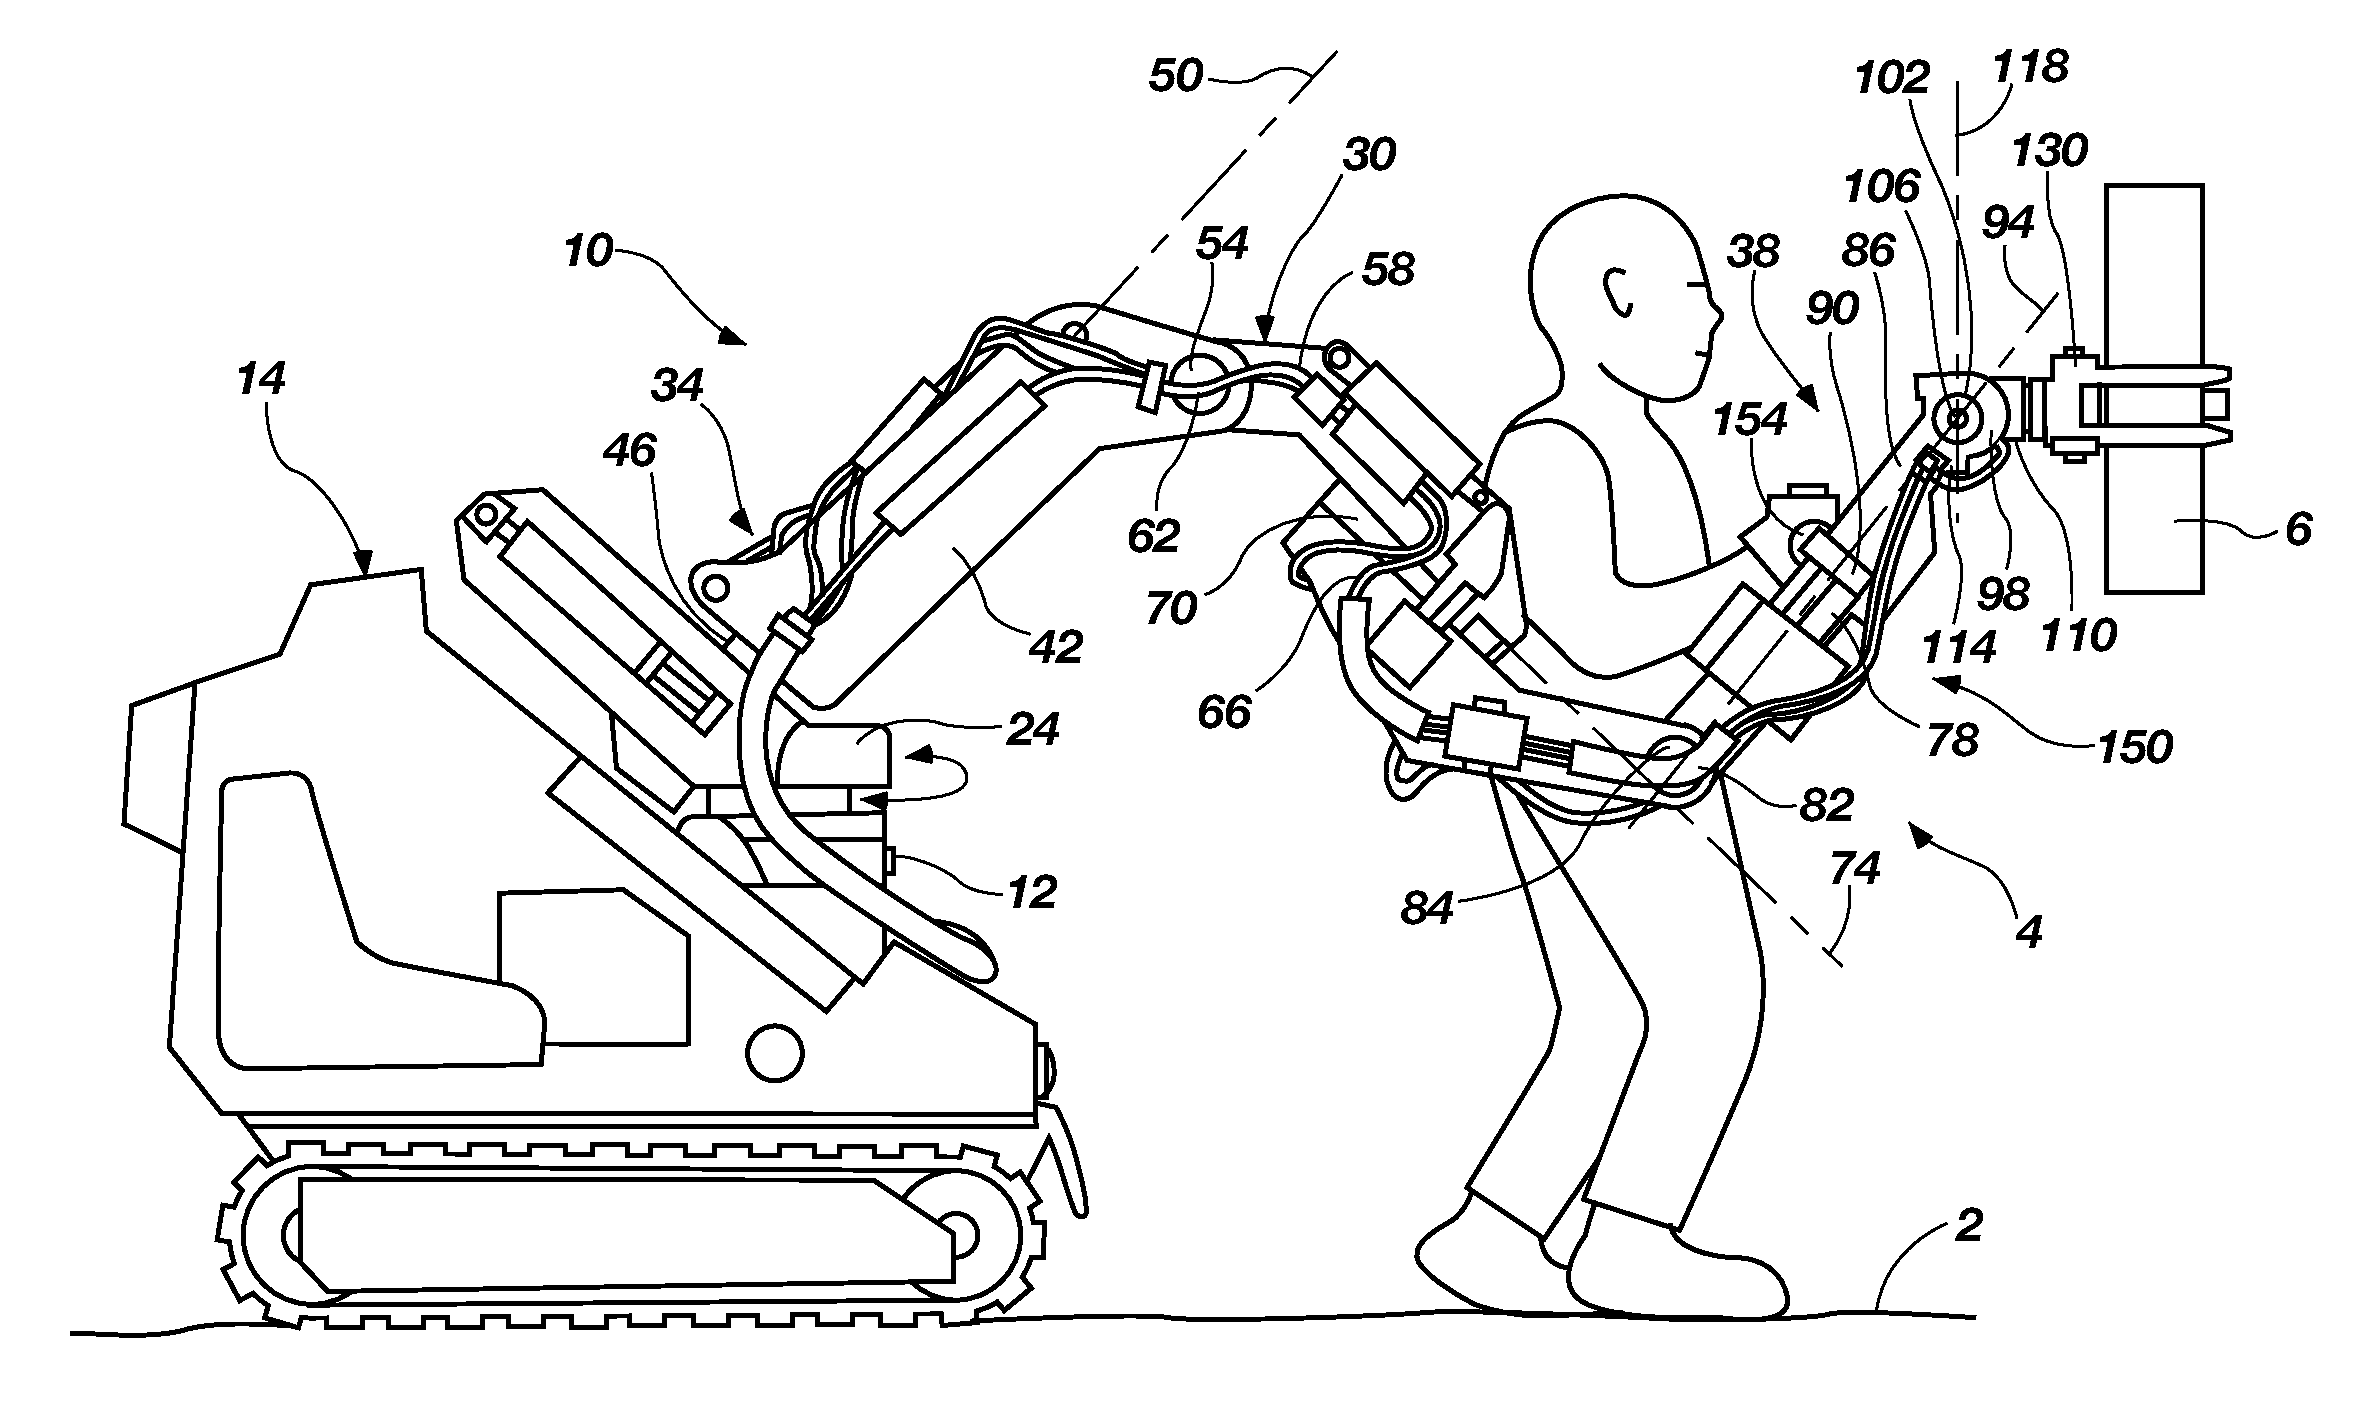 Robotic Agile Lift System With Extremity Control